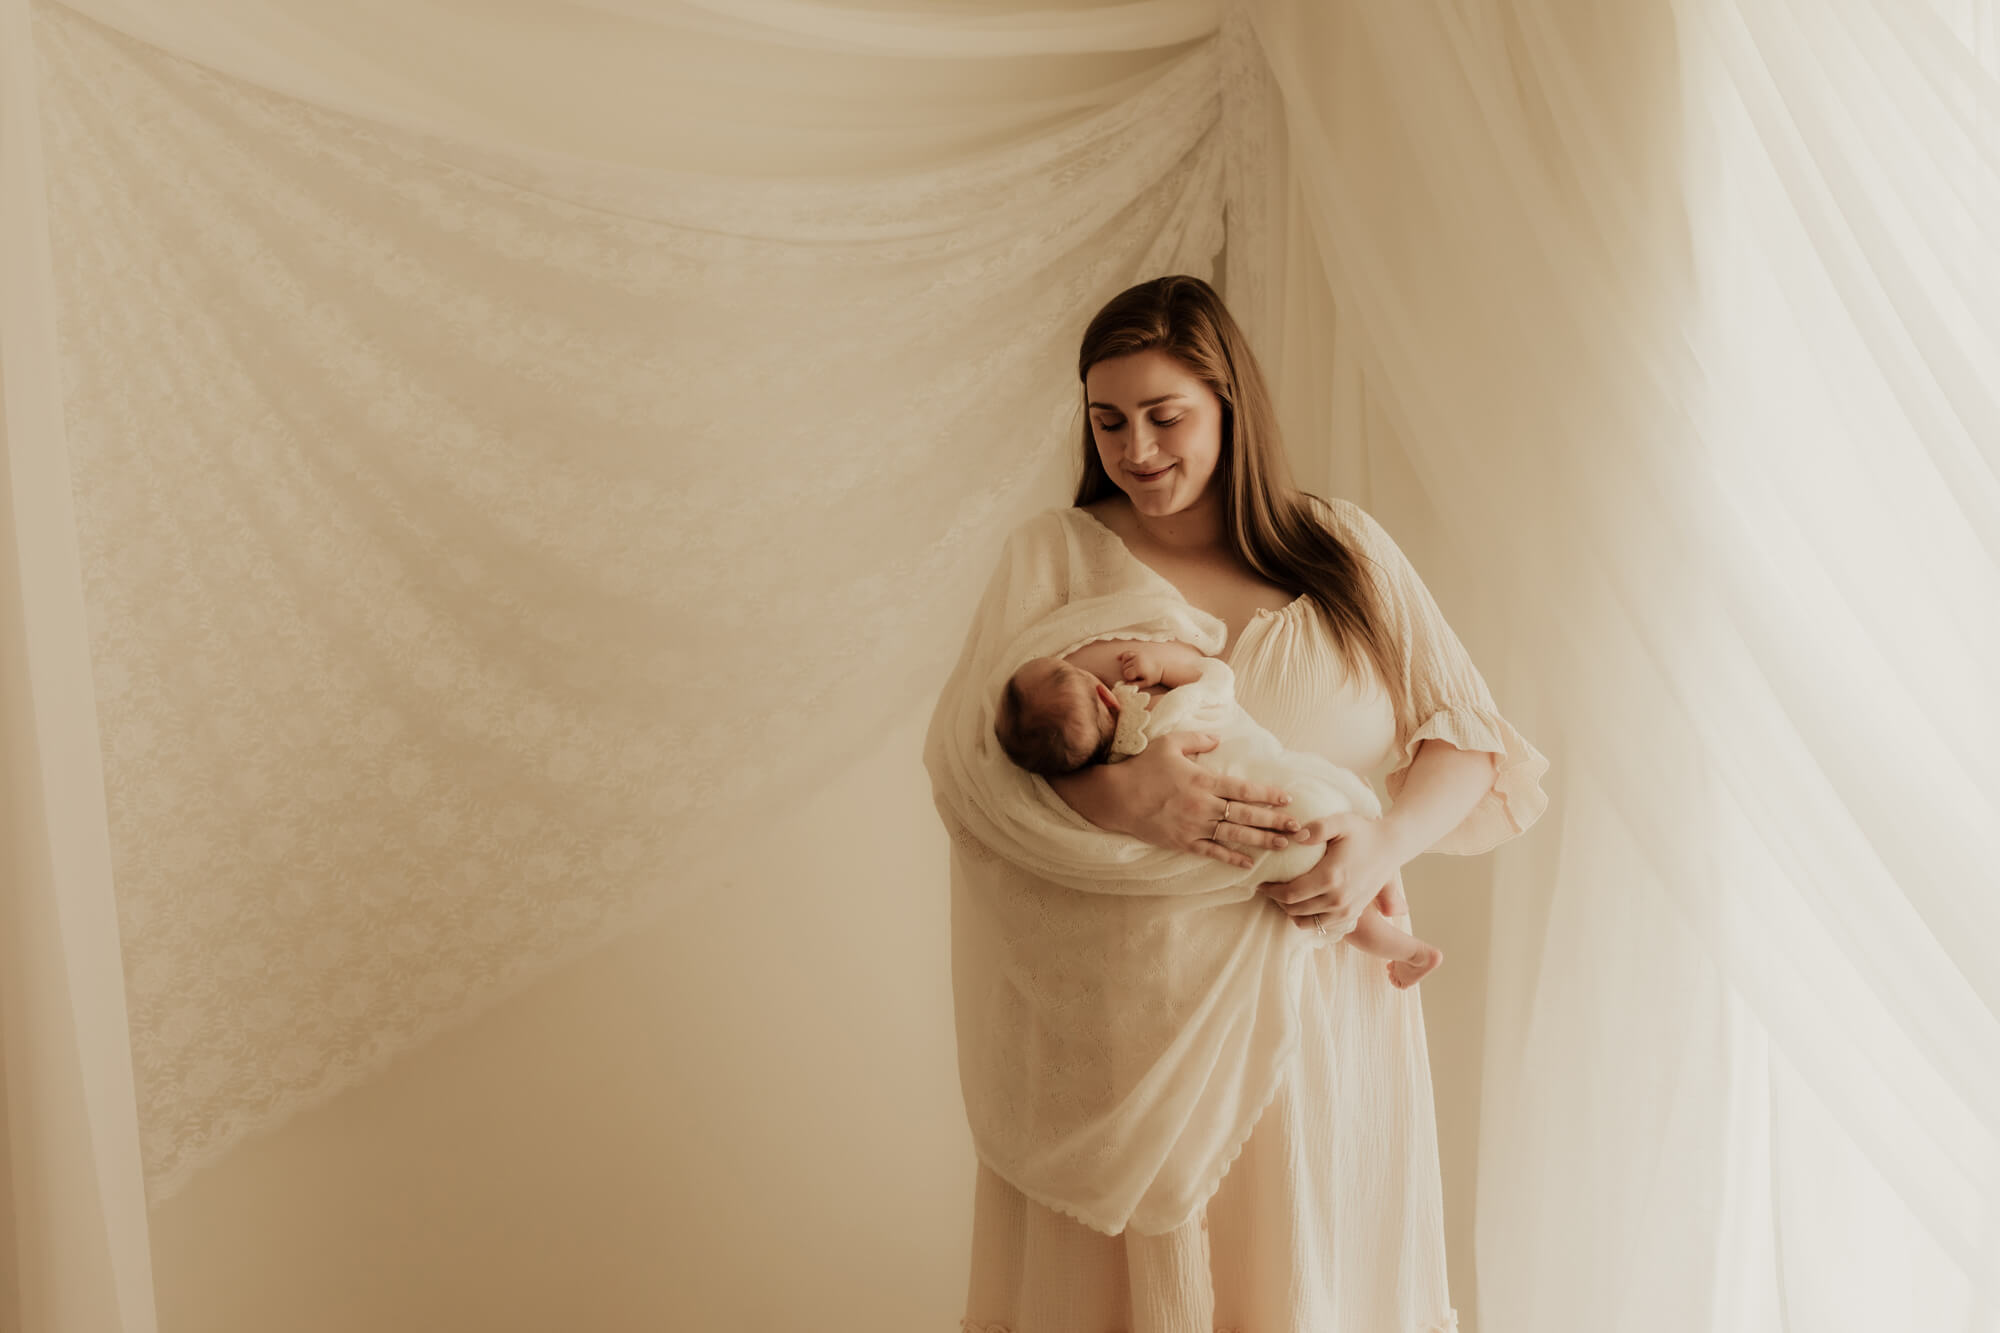 A mother stands in a studio in a white dress while breastfeeding her newborn daughter